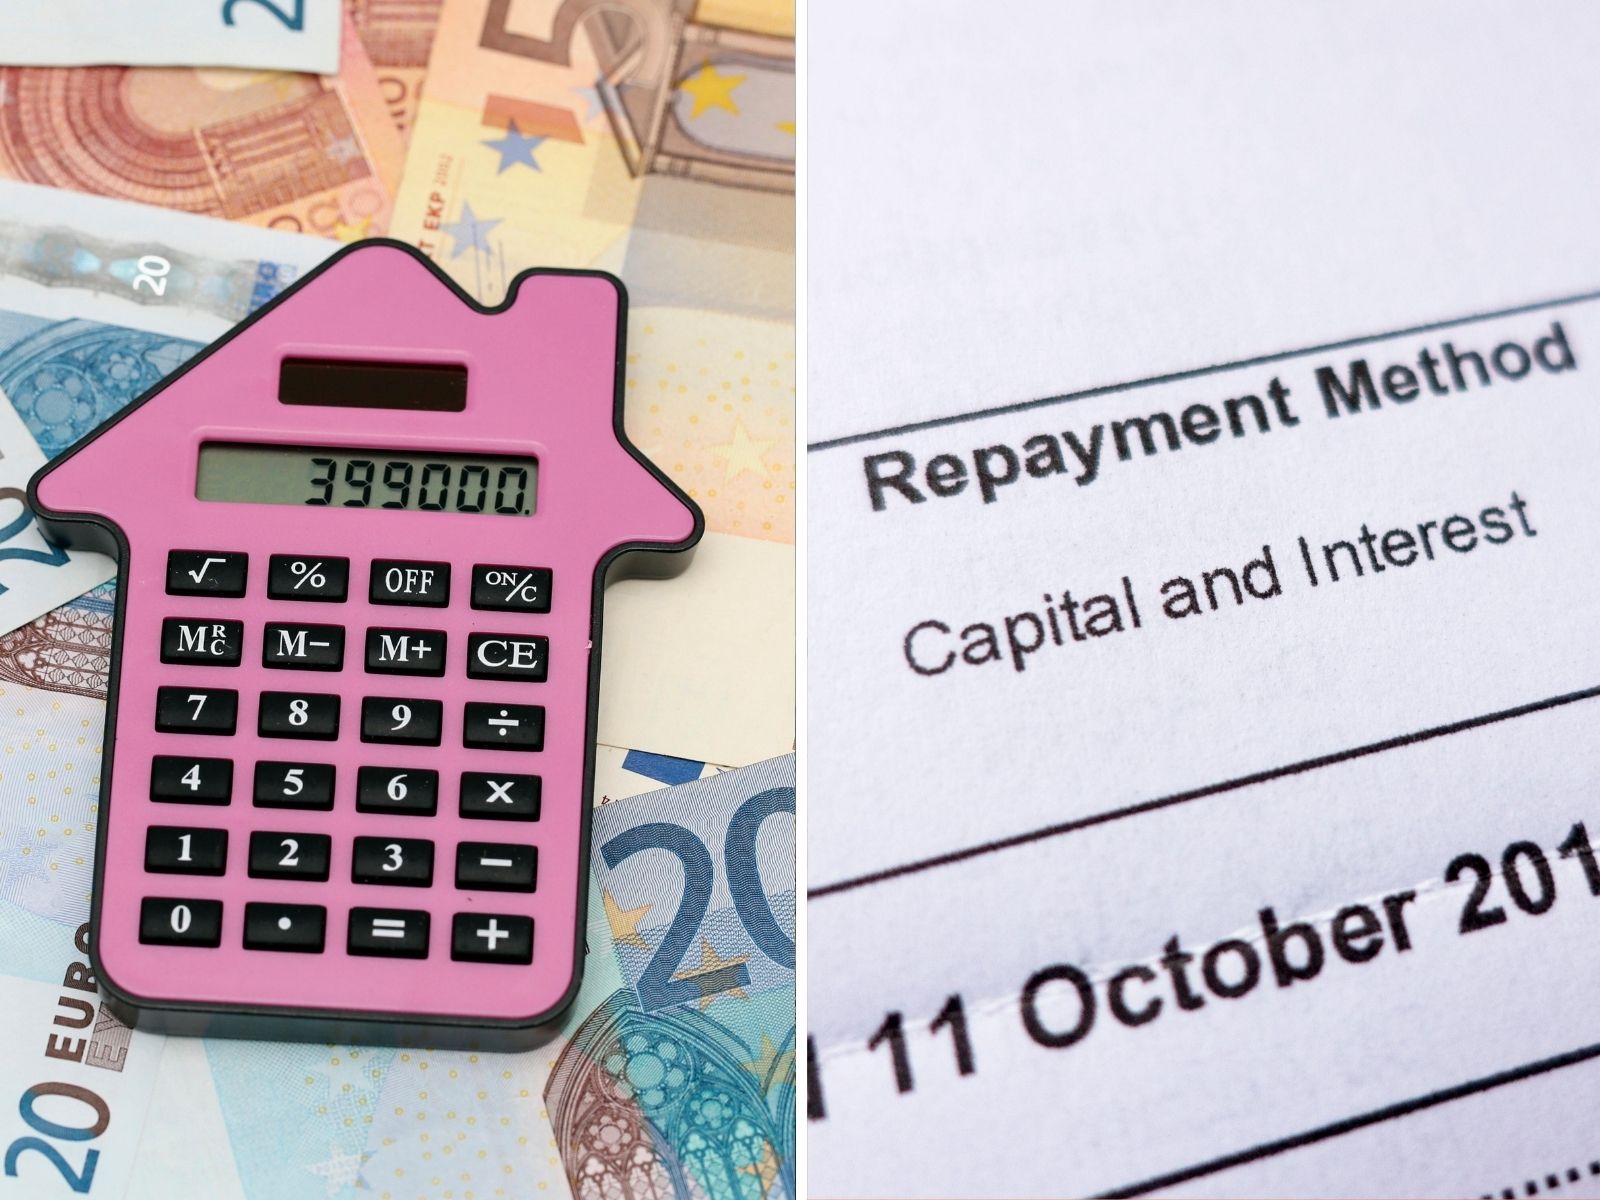 Composite file photo shows a calculator in the shape of a house on top of euro notes, and a mortgage finance statement.